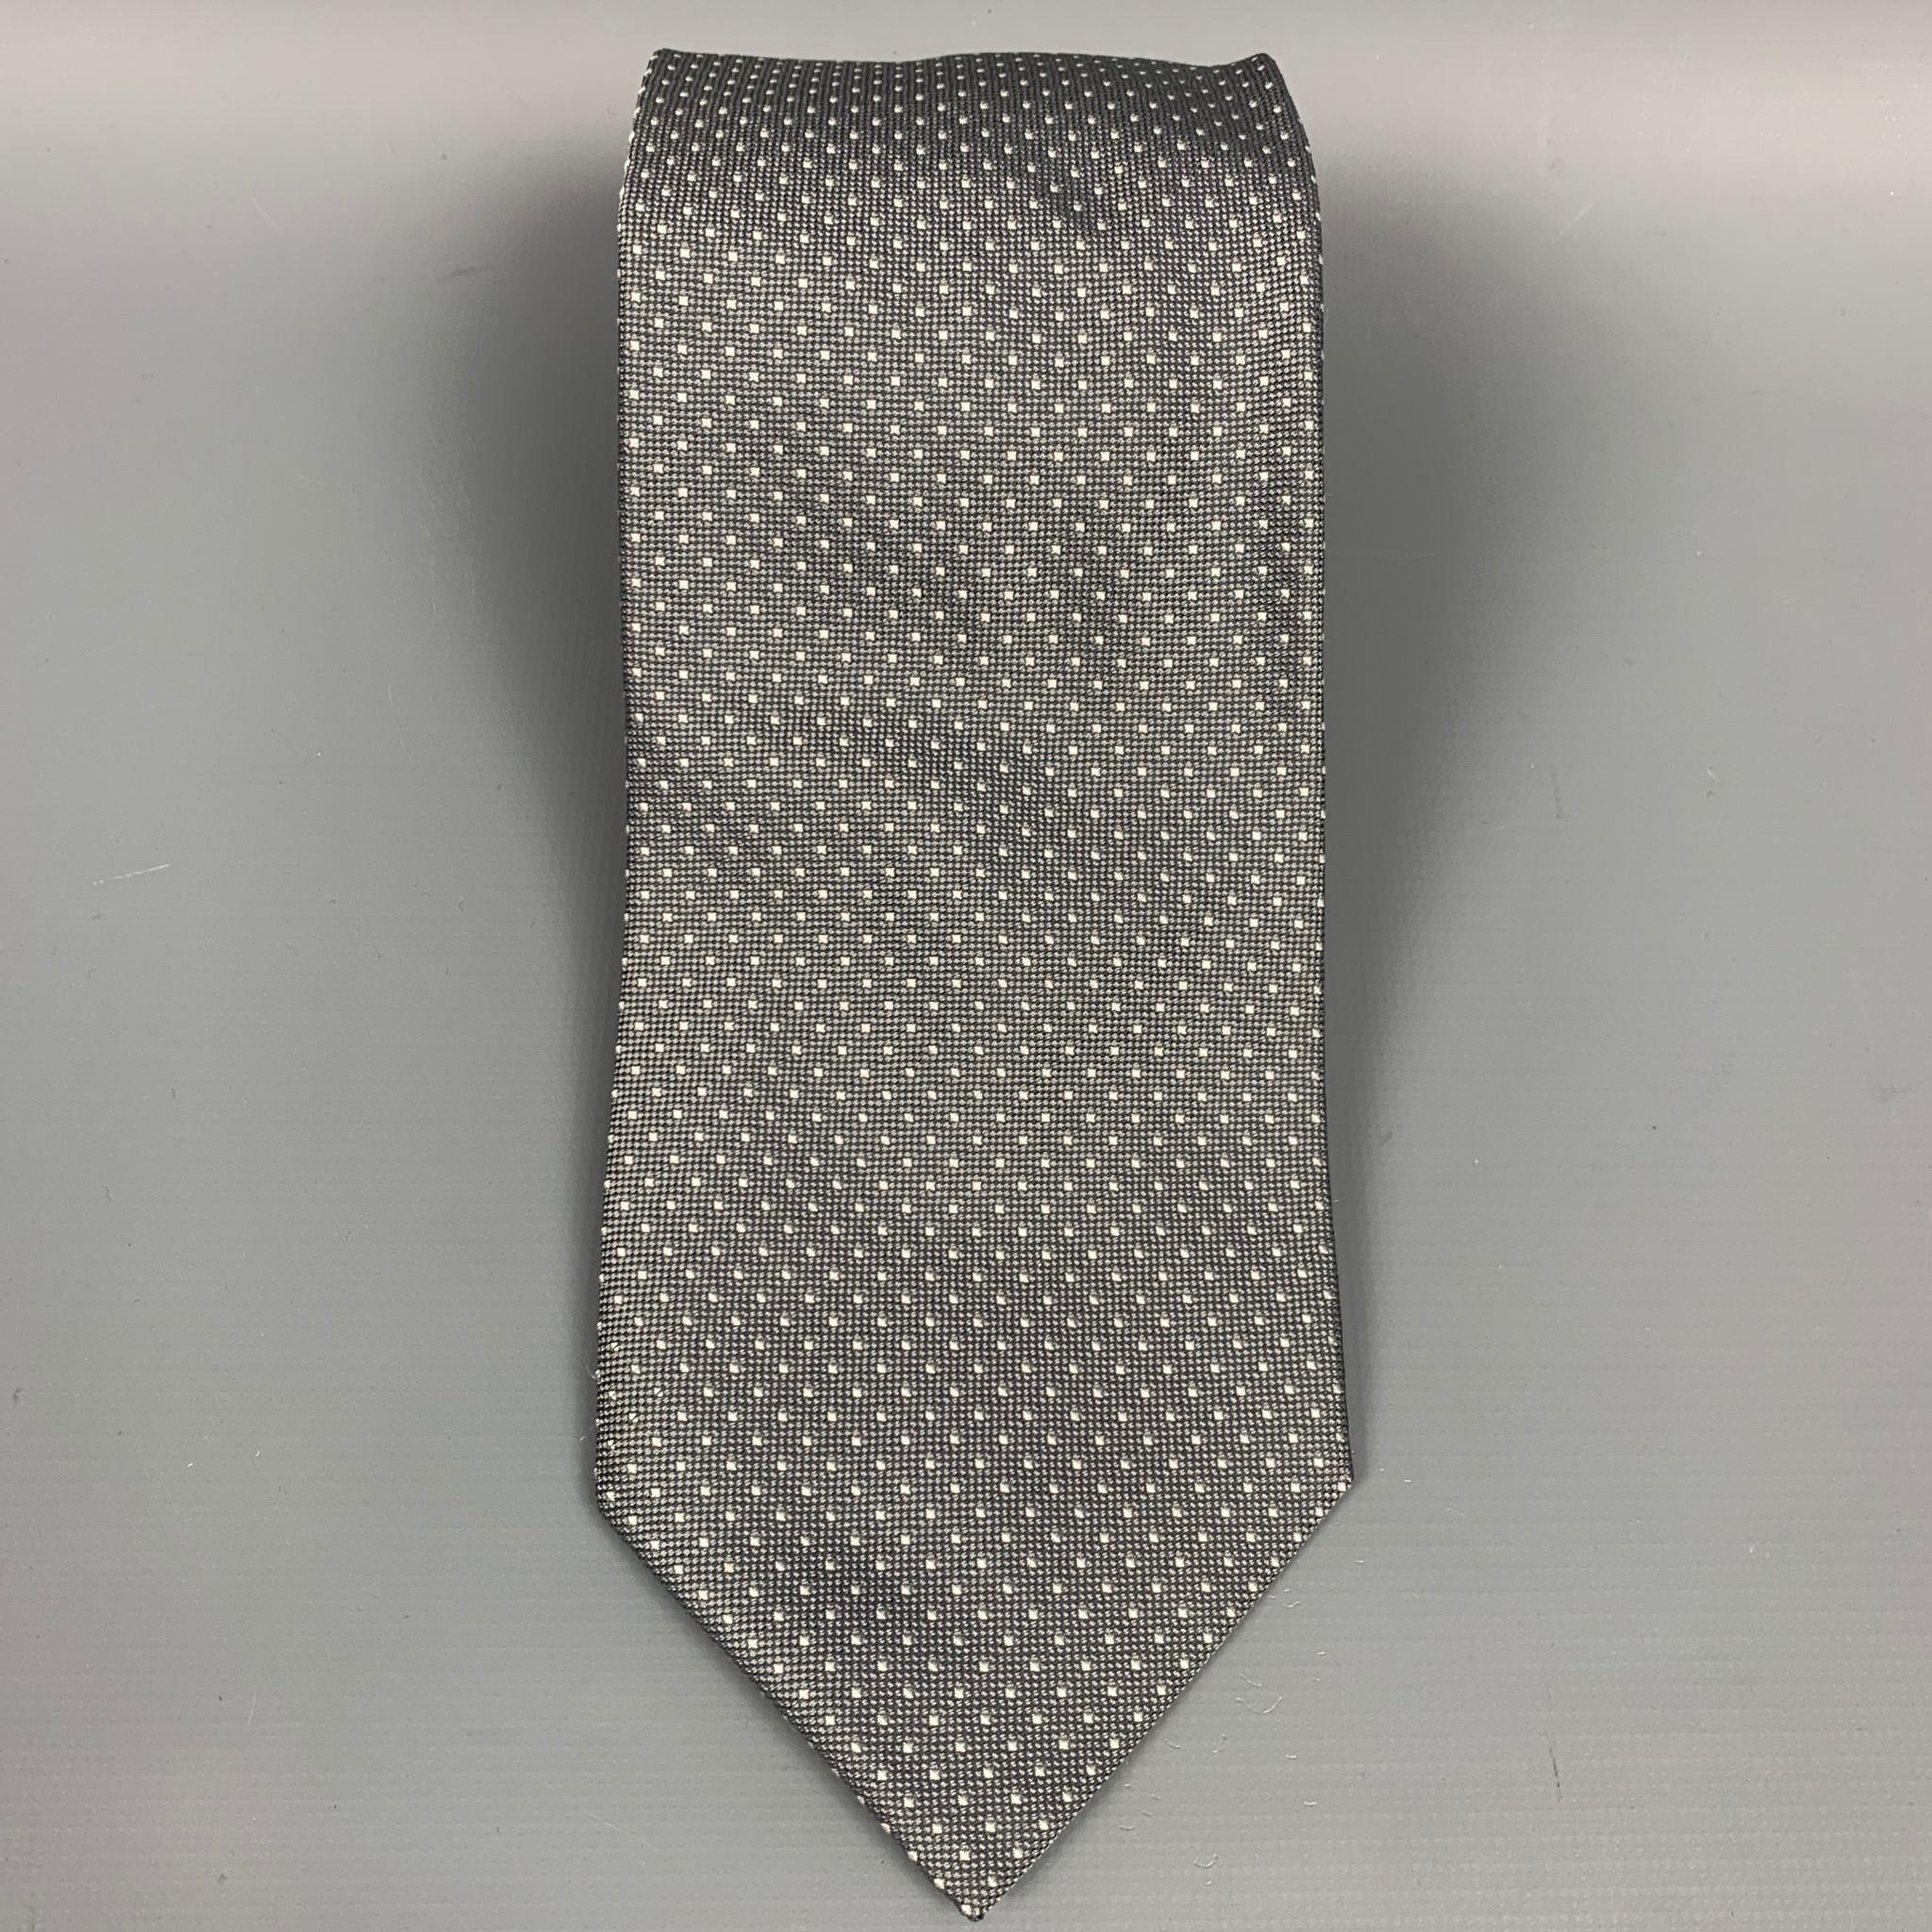 LORO PIANA neck tie comes in a gre & white dot print silk. Handmade in Italy.

Very Good Pre-Owned Condition.

Measurements:

Width: 3.5 in.